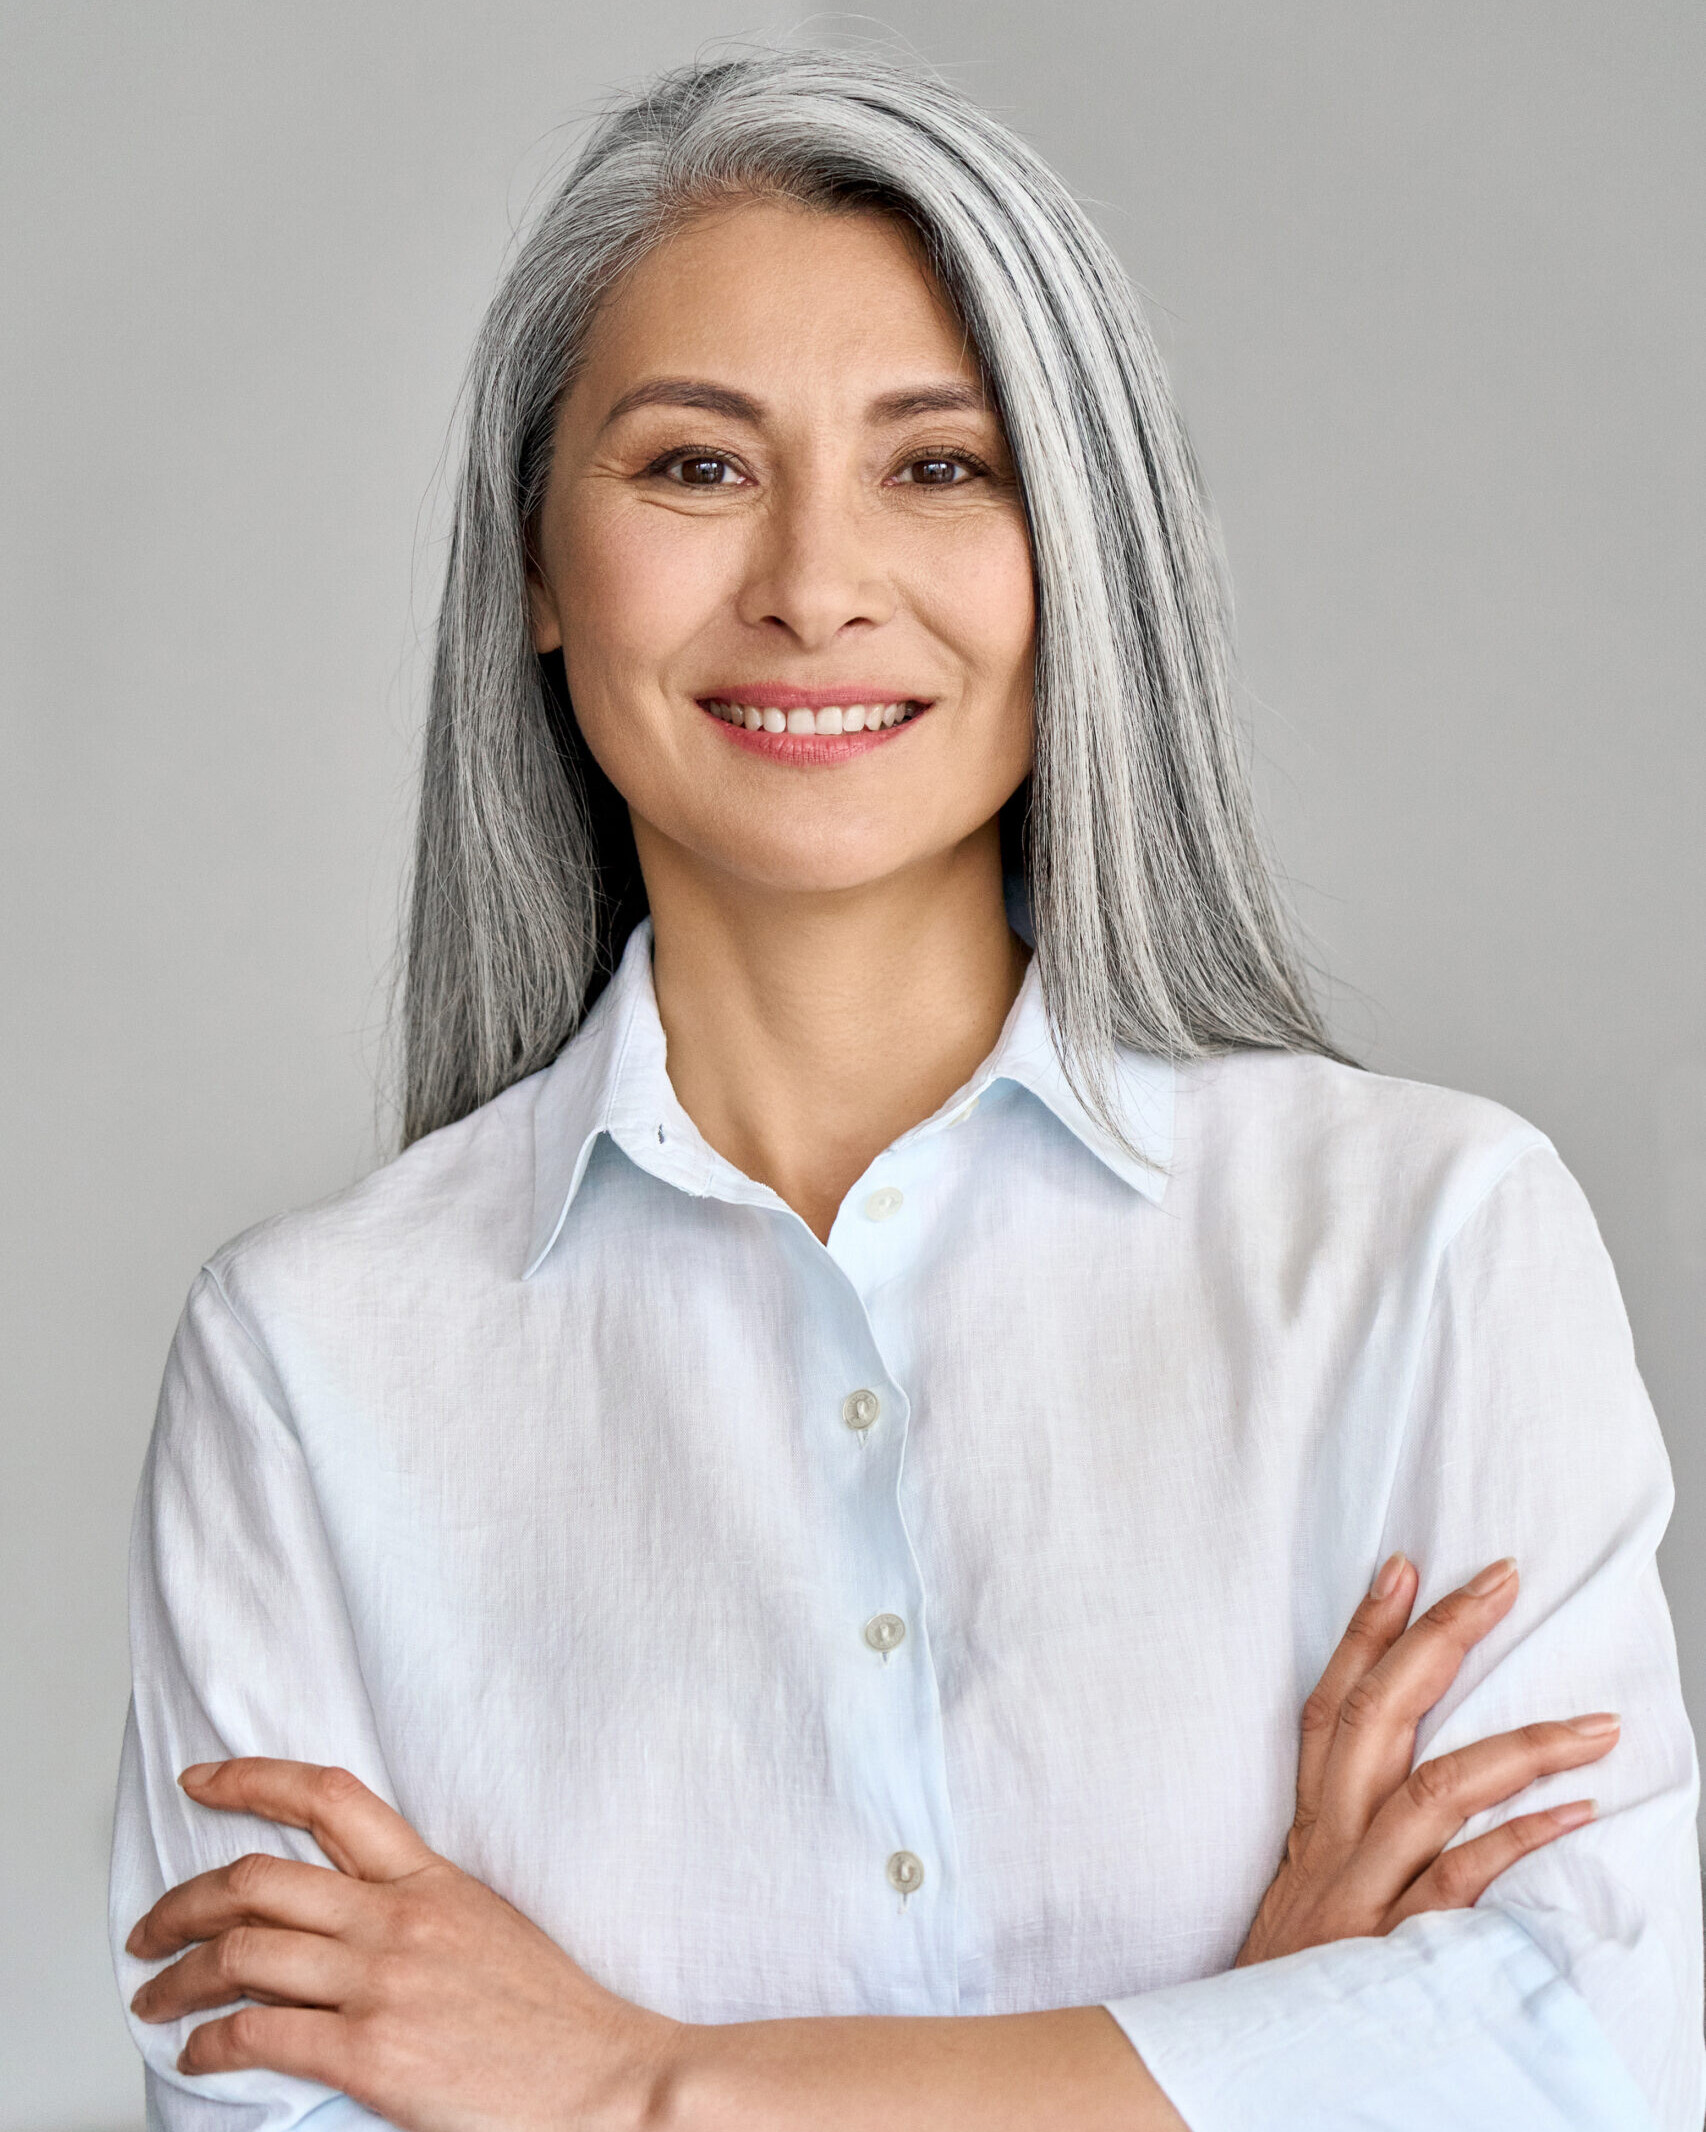 Vertical portrait of mature 50 years Asian business woman on grey background.